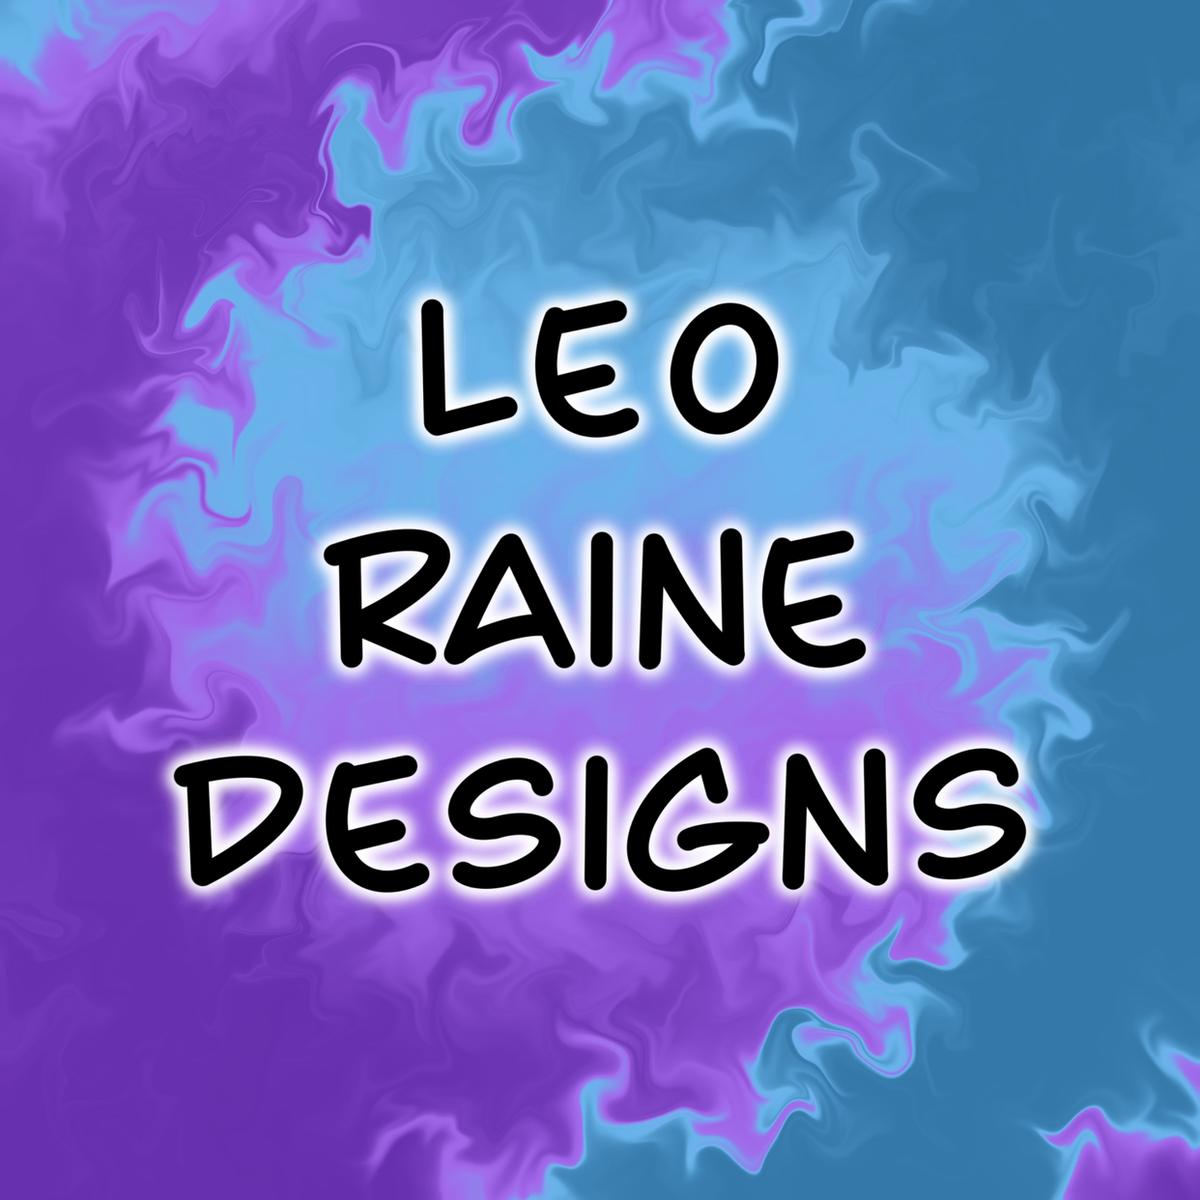 LeoRaineDesigns's images